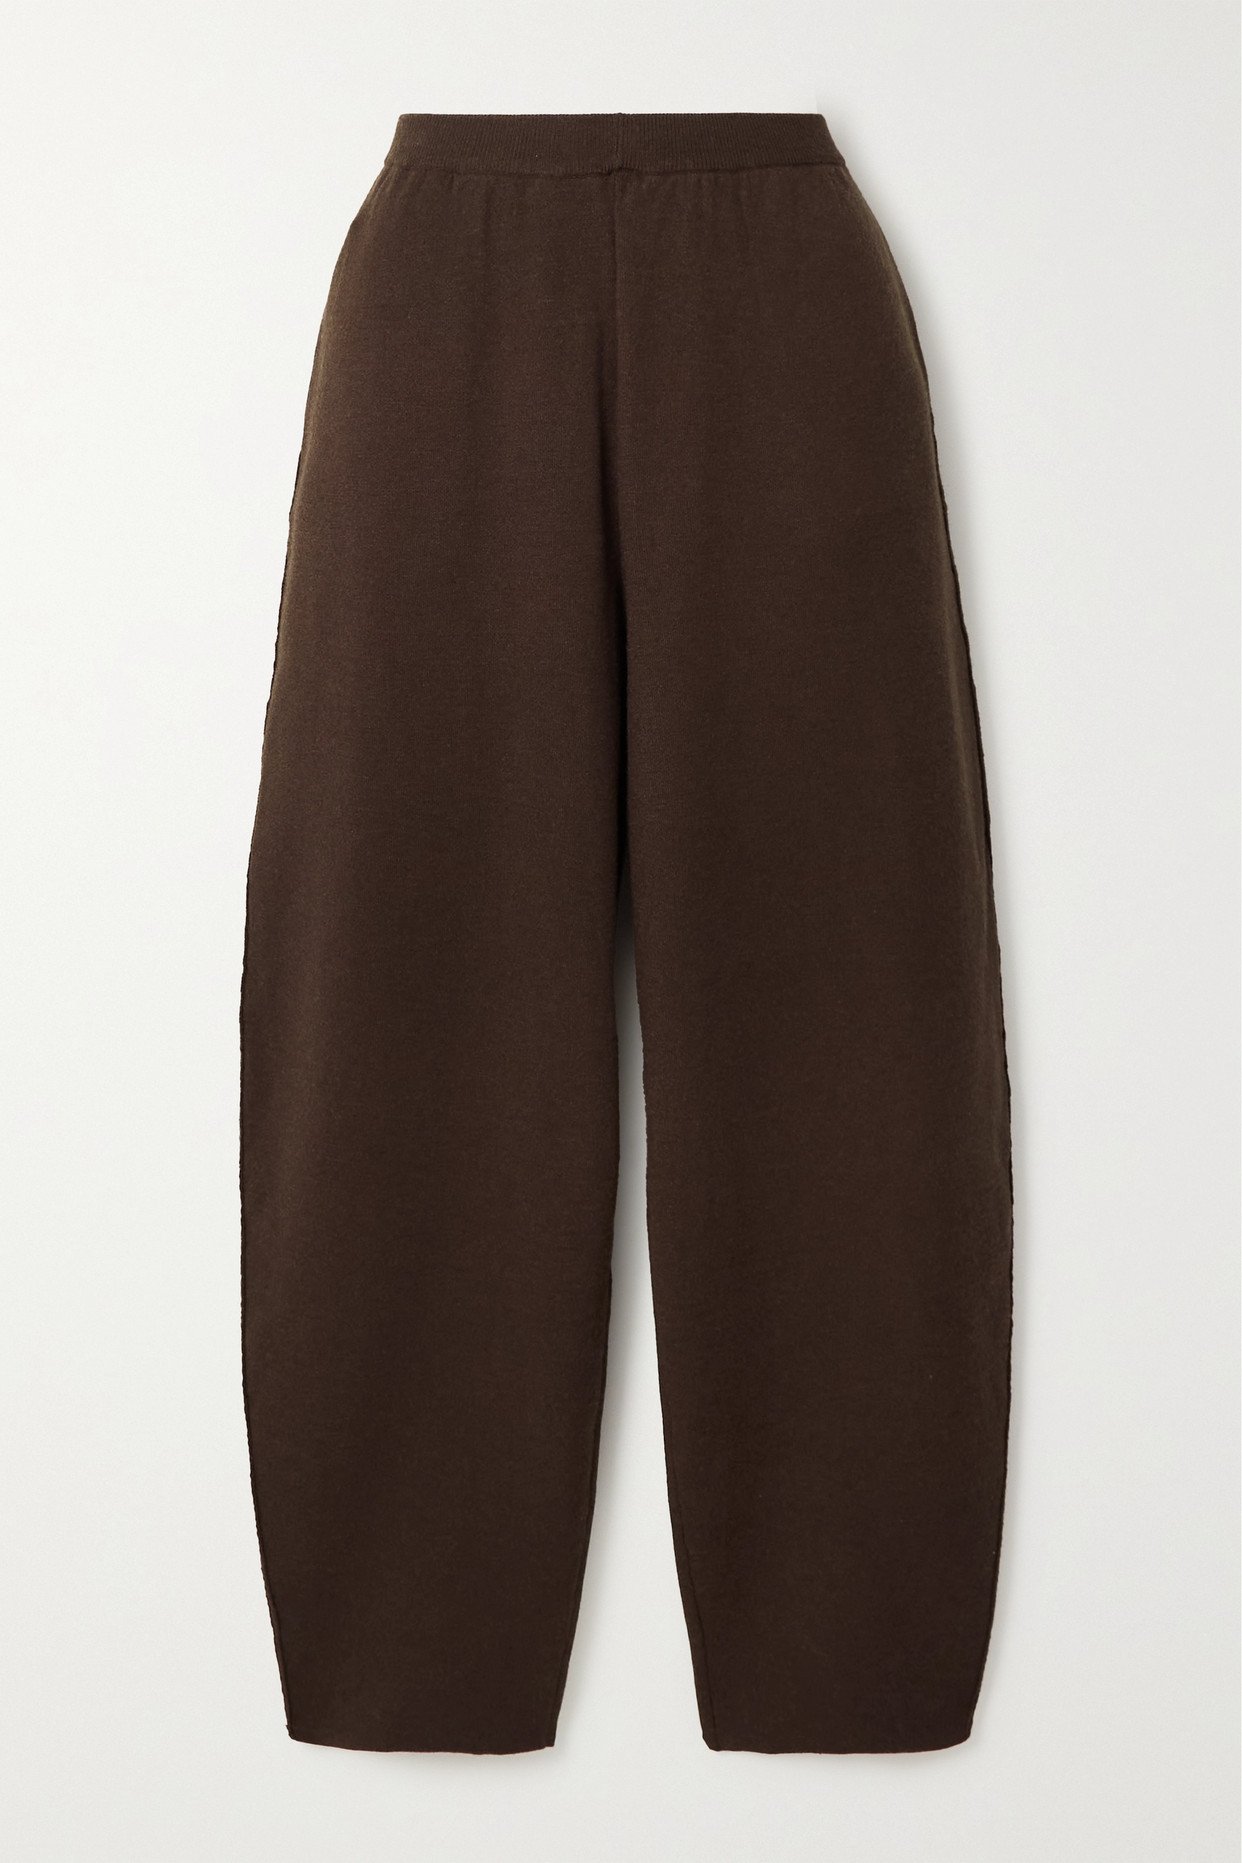 DEIJI STUDIOS The Curved Knitted Tapered Pants in Brown